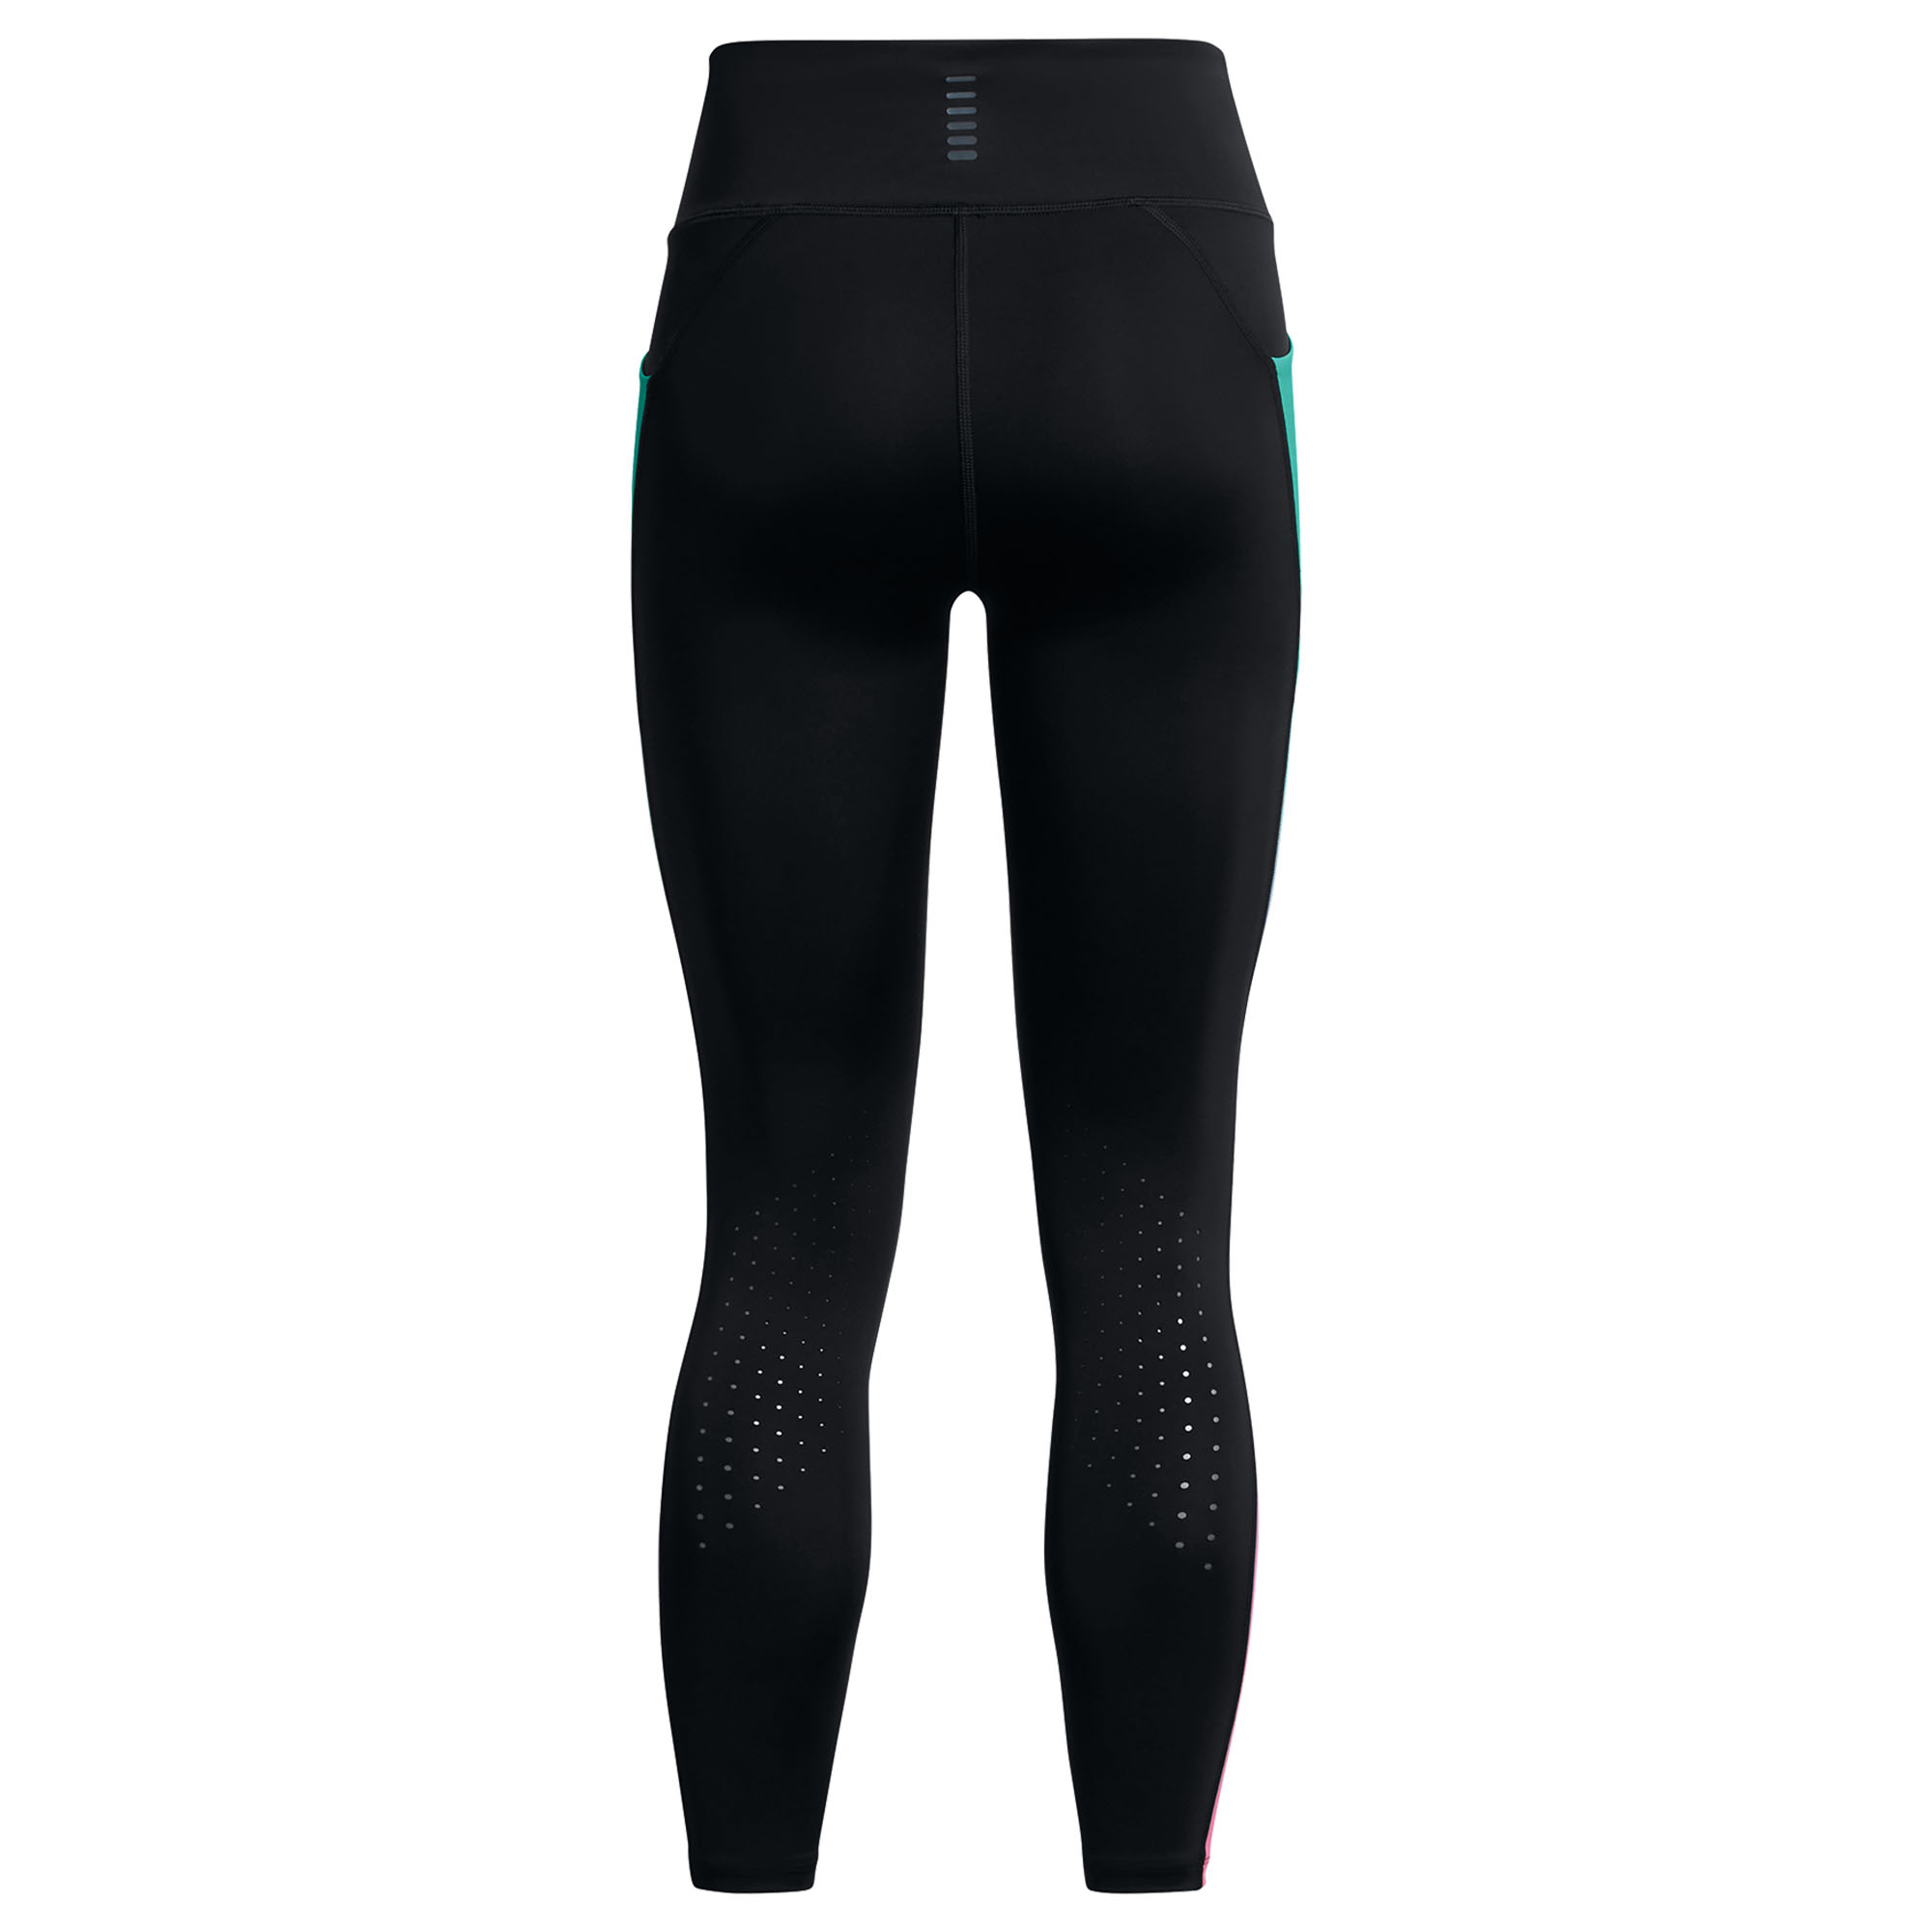 Stay comfortable and stylish with Under Armour Women's Speedpocket